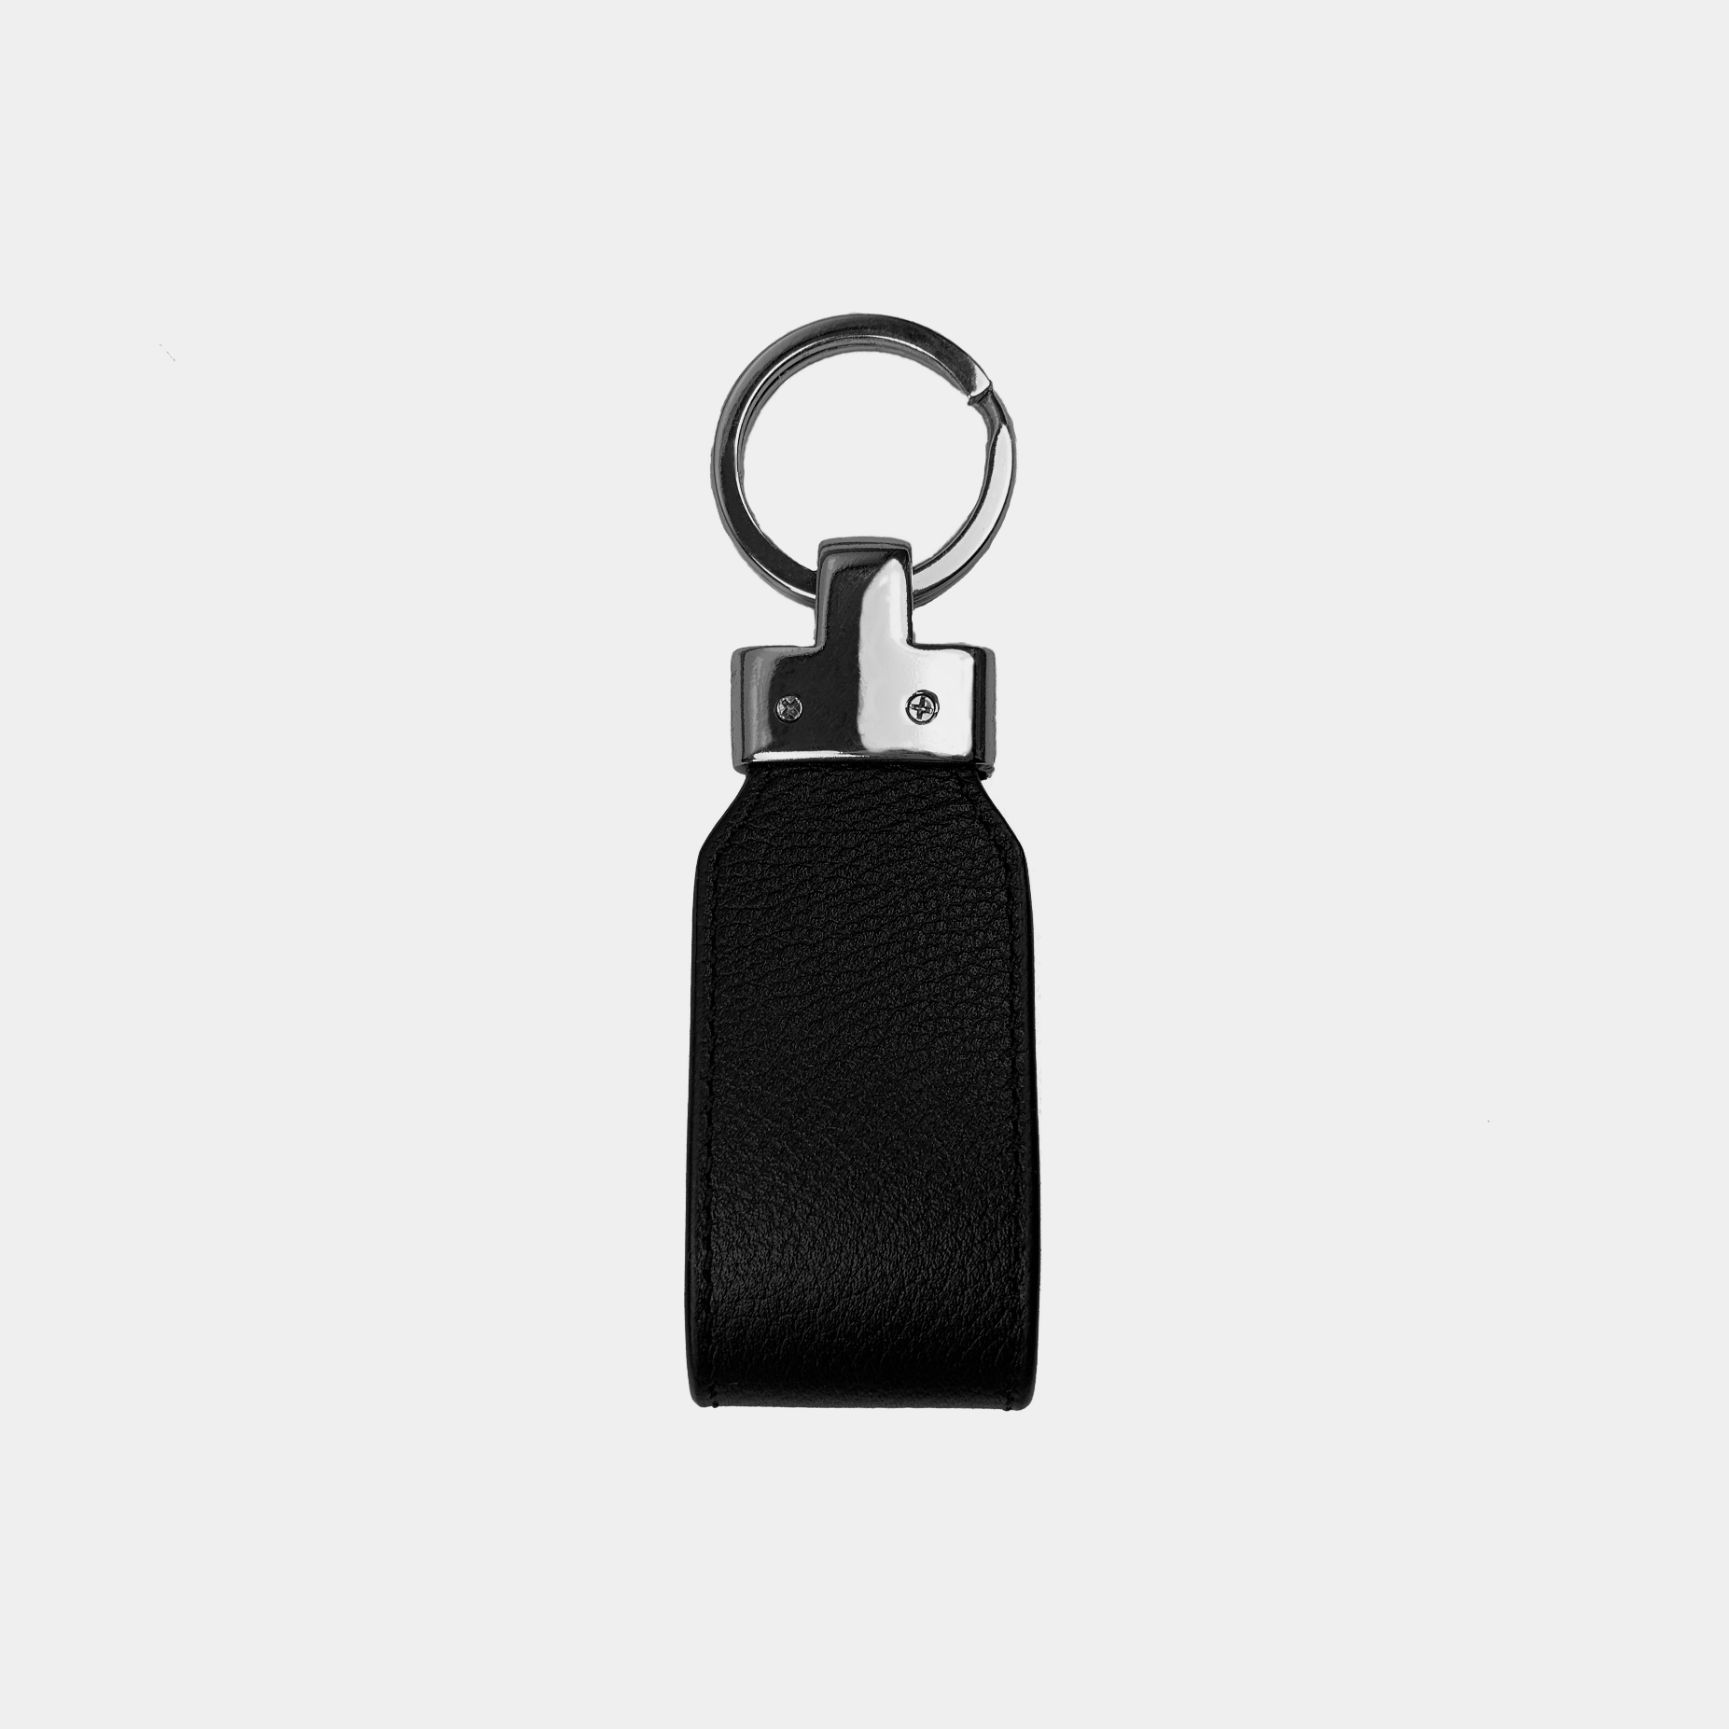 Luxury leather loop keyring branded with your company logo.